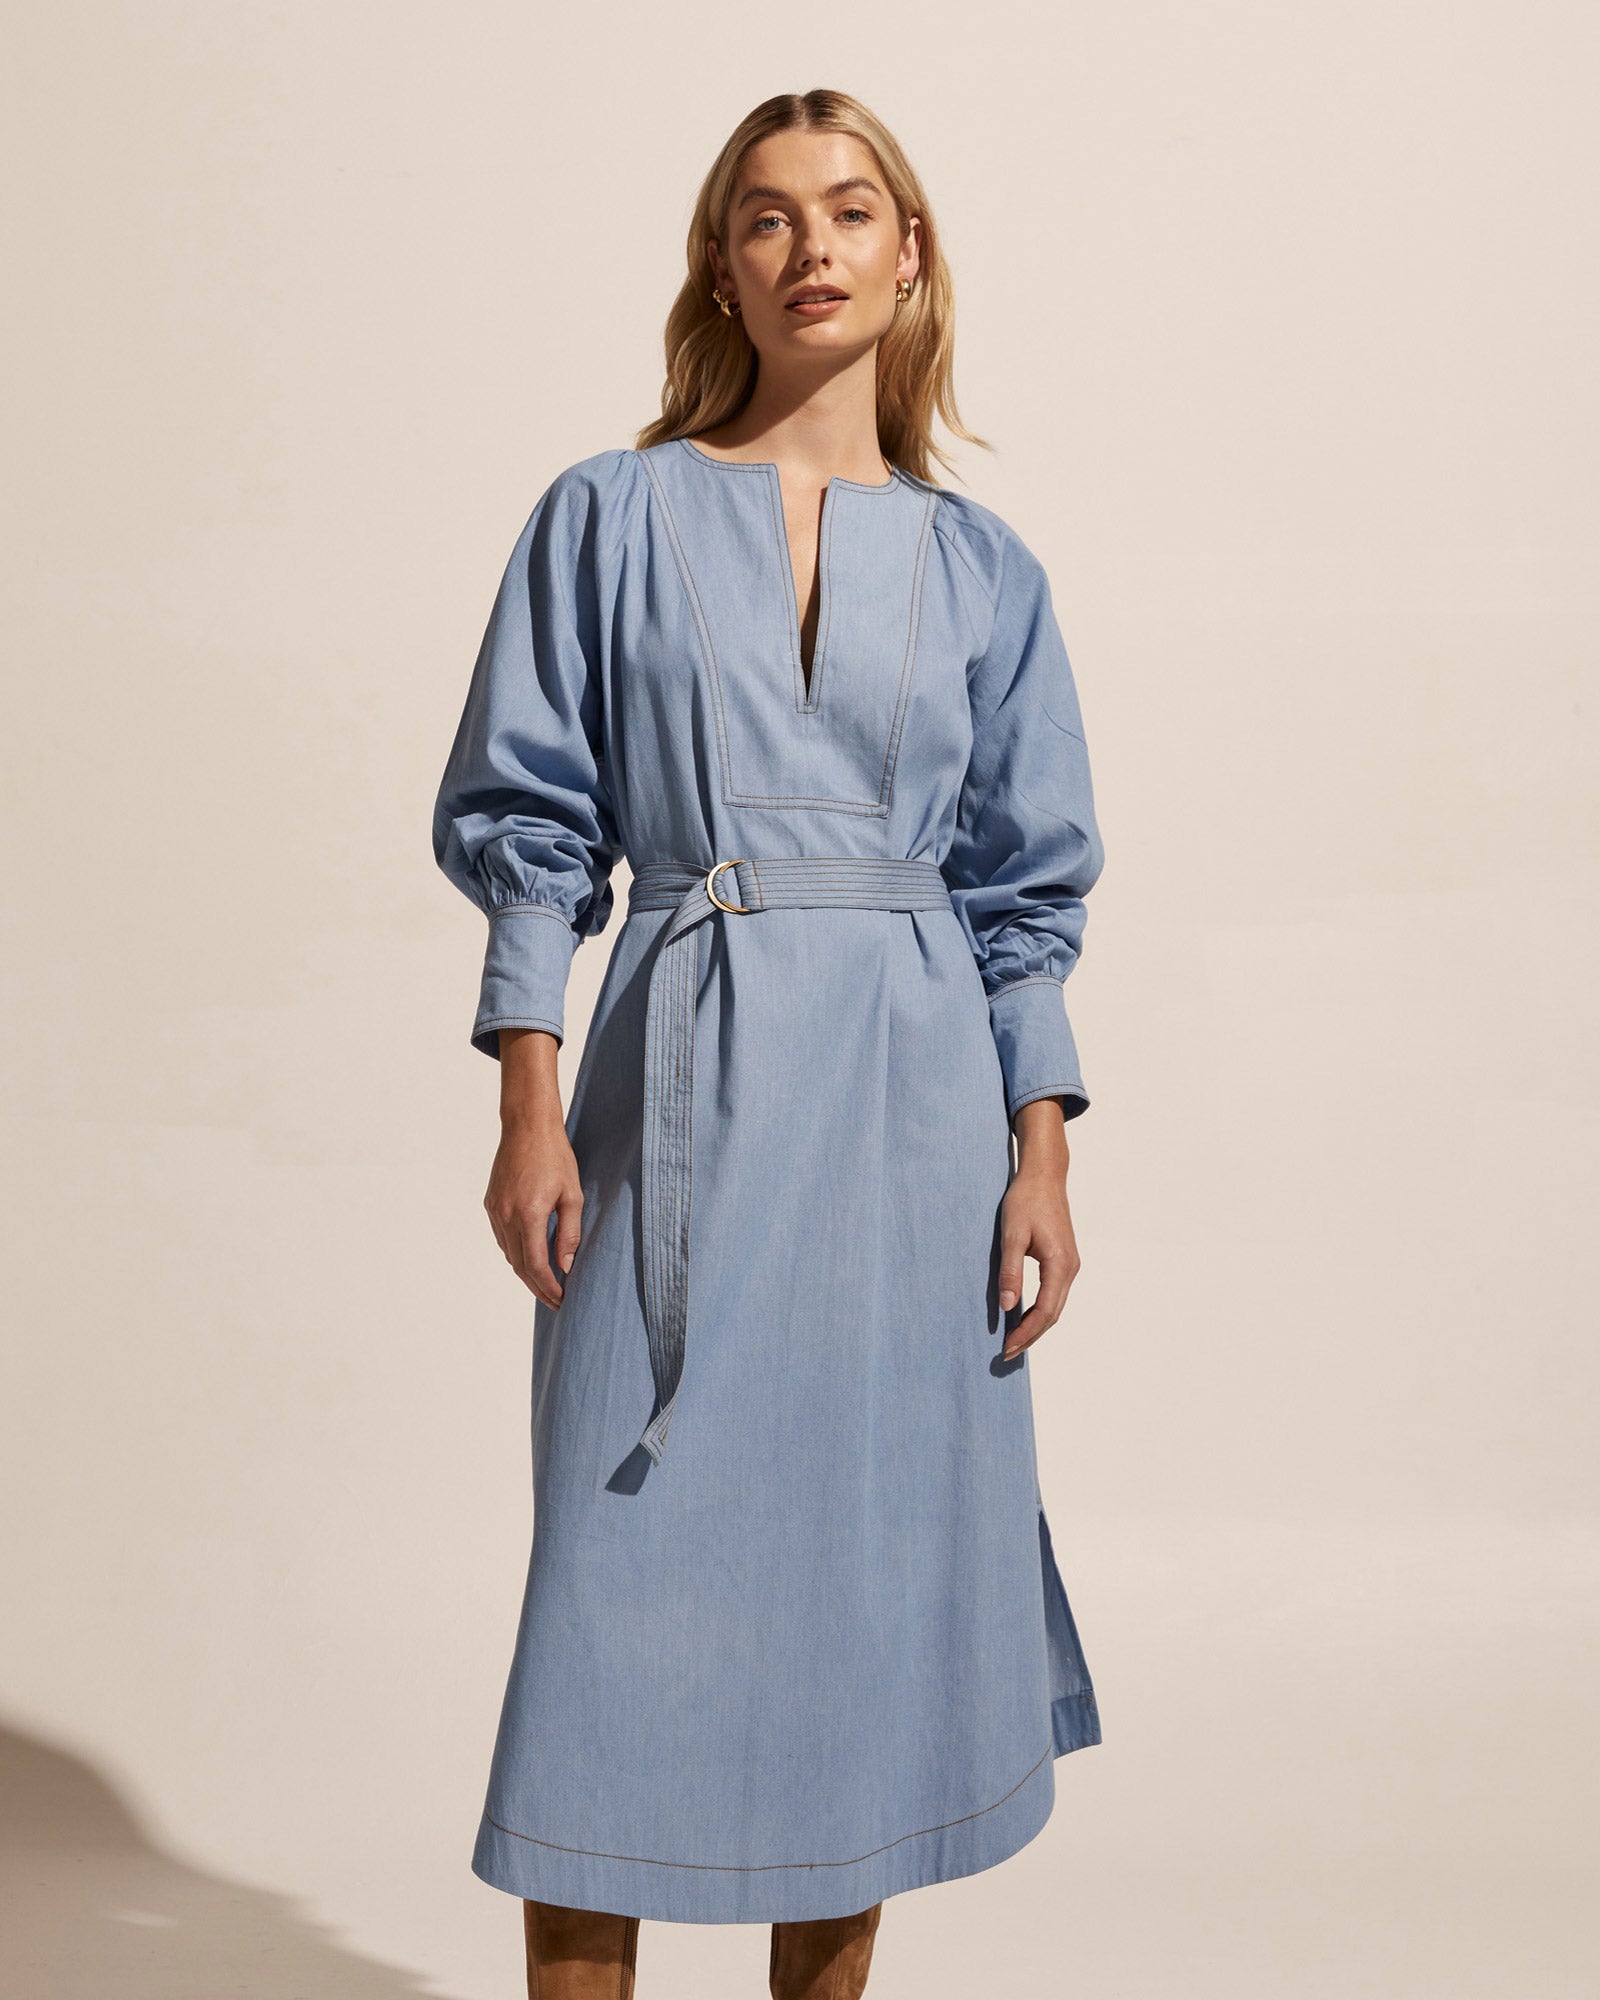 standpoint dress - light chambray